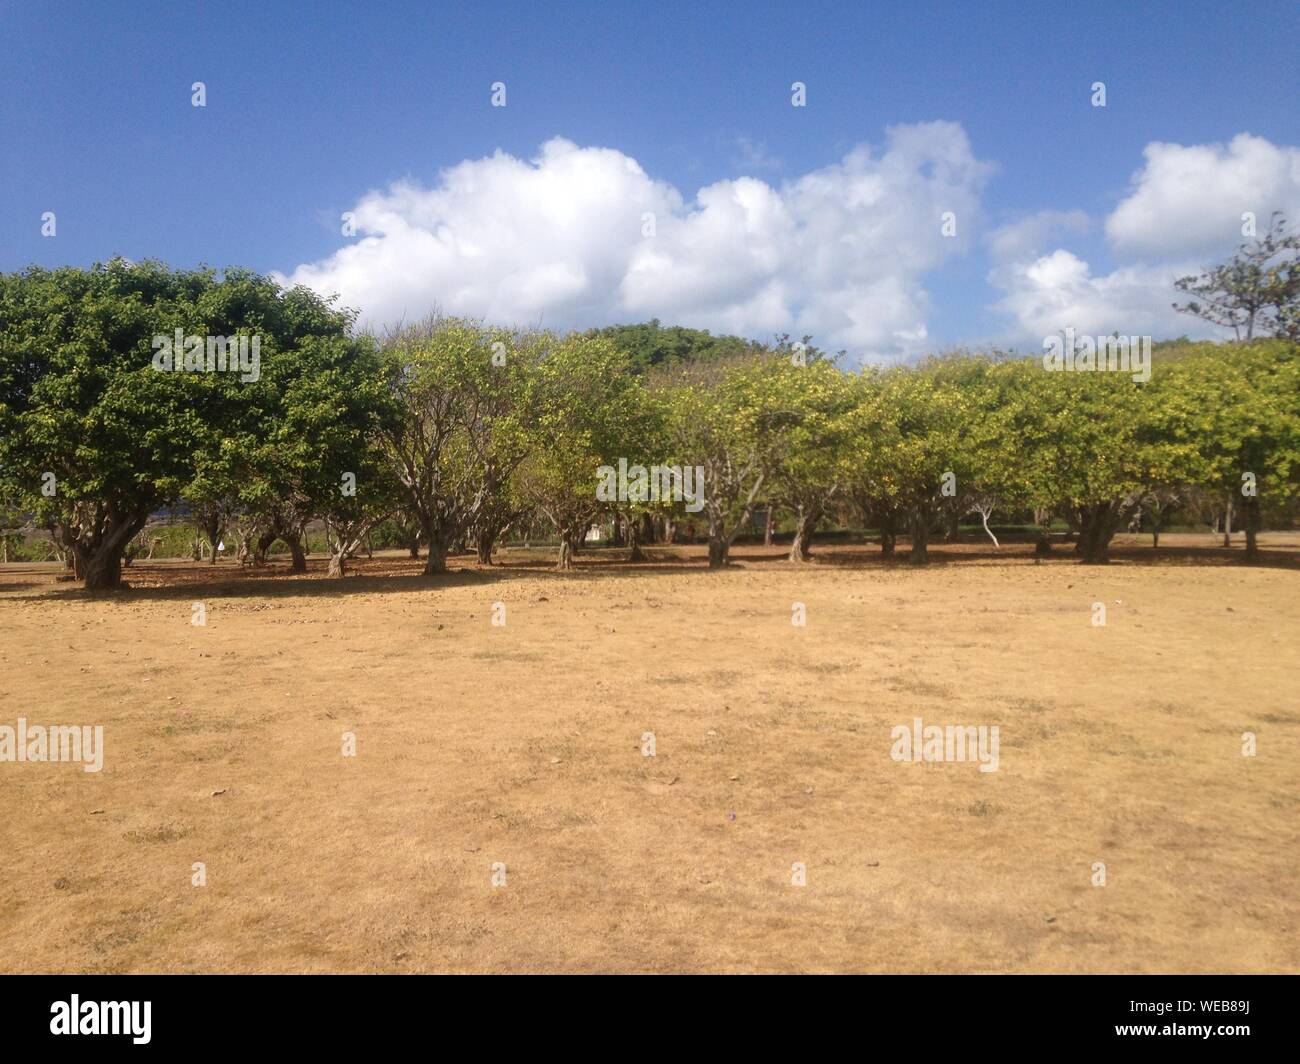 Trees In Arid Climate Stock Photo